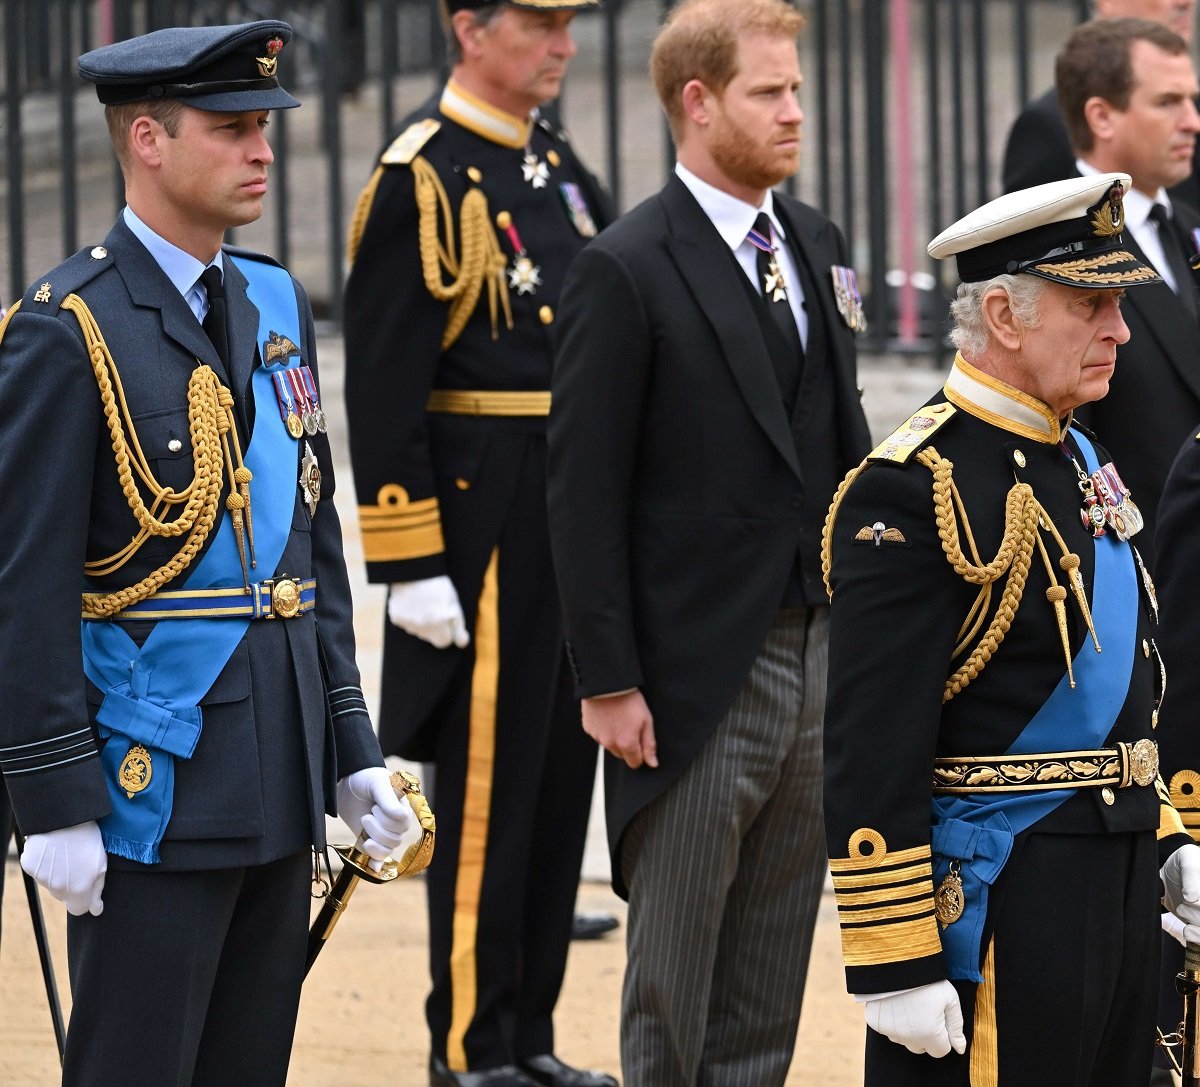 Prince William, Prince Harry, and King Charles III during the state funeral procession of Queen Elizabeth II at Westminster Abbey